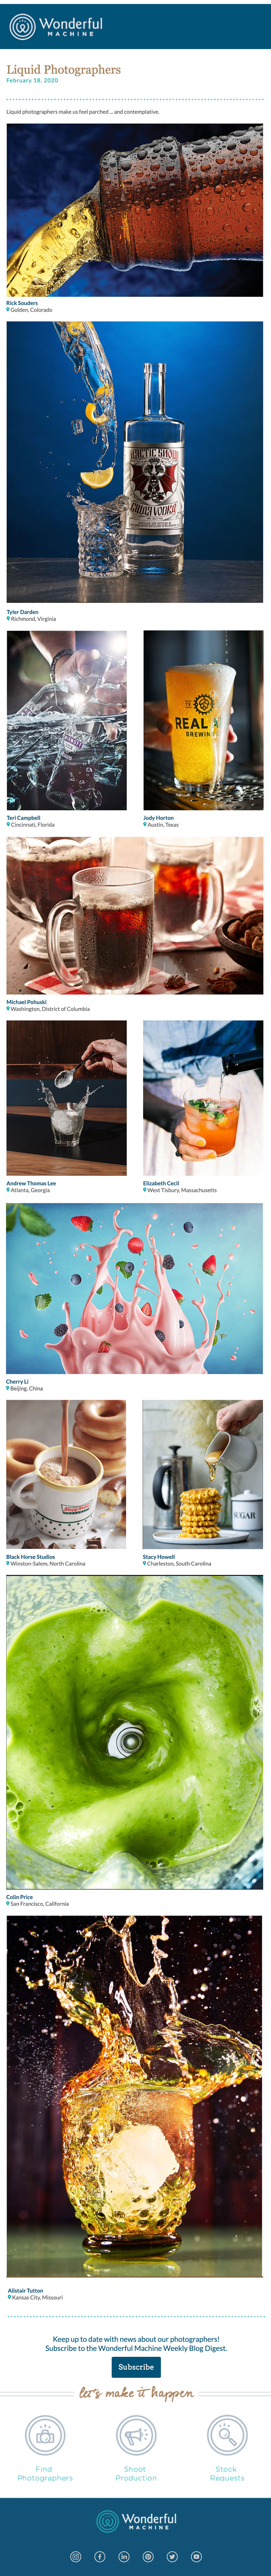 Wonderful Machine's February 2020 specialty emailer on liquids photography.